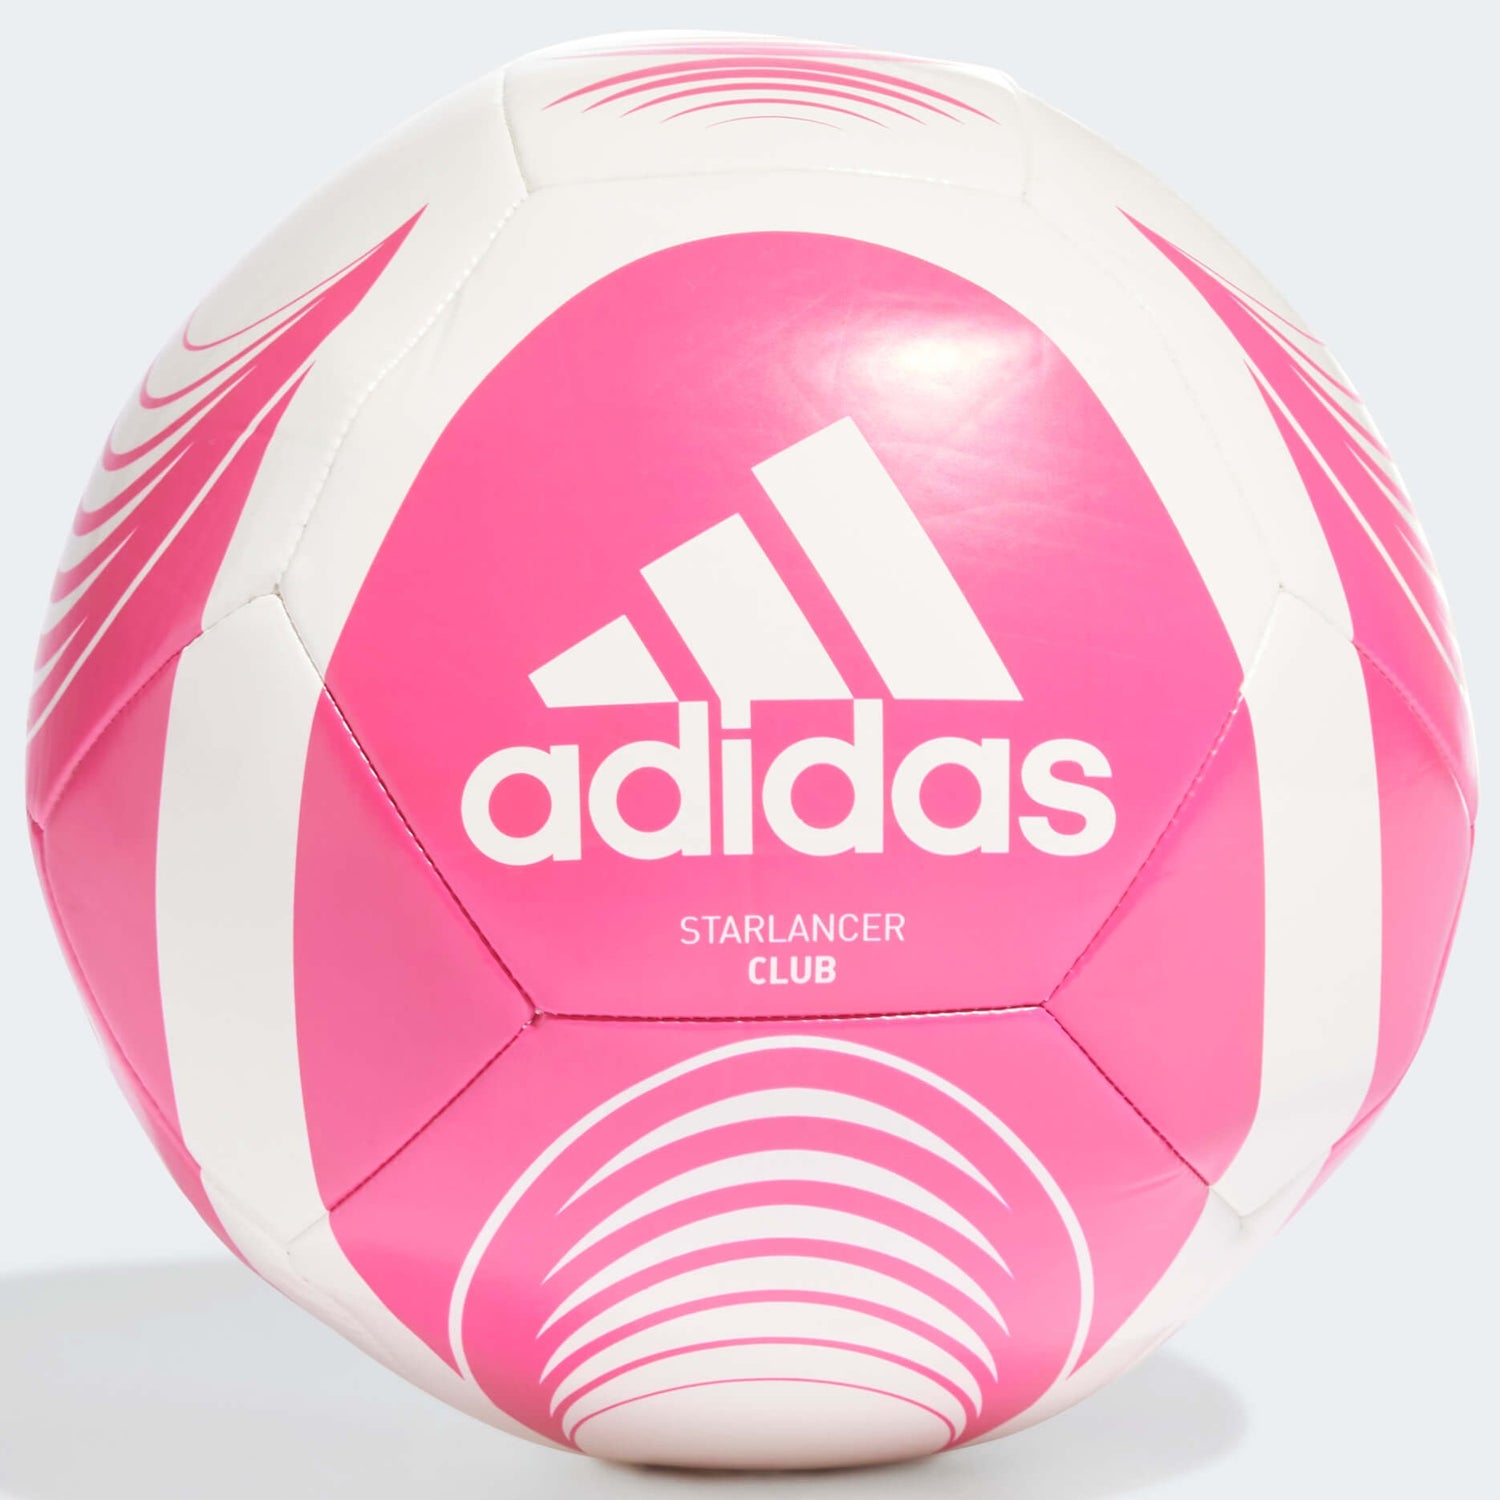 adidas Starlancer Club Soccer Ball - Pink-White (Front)